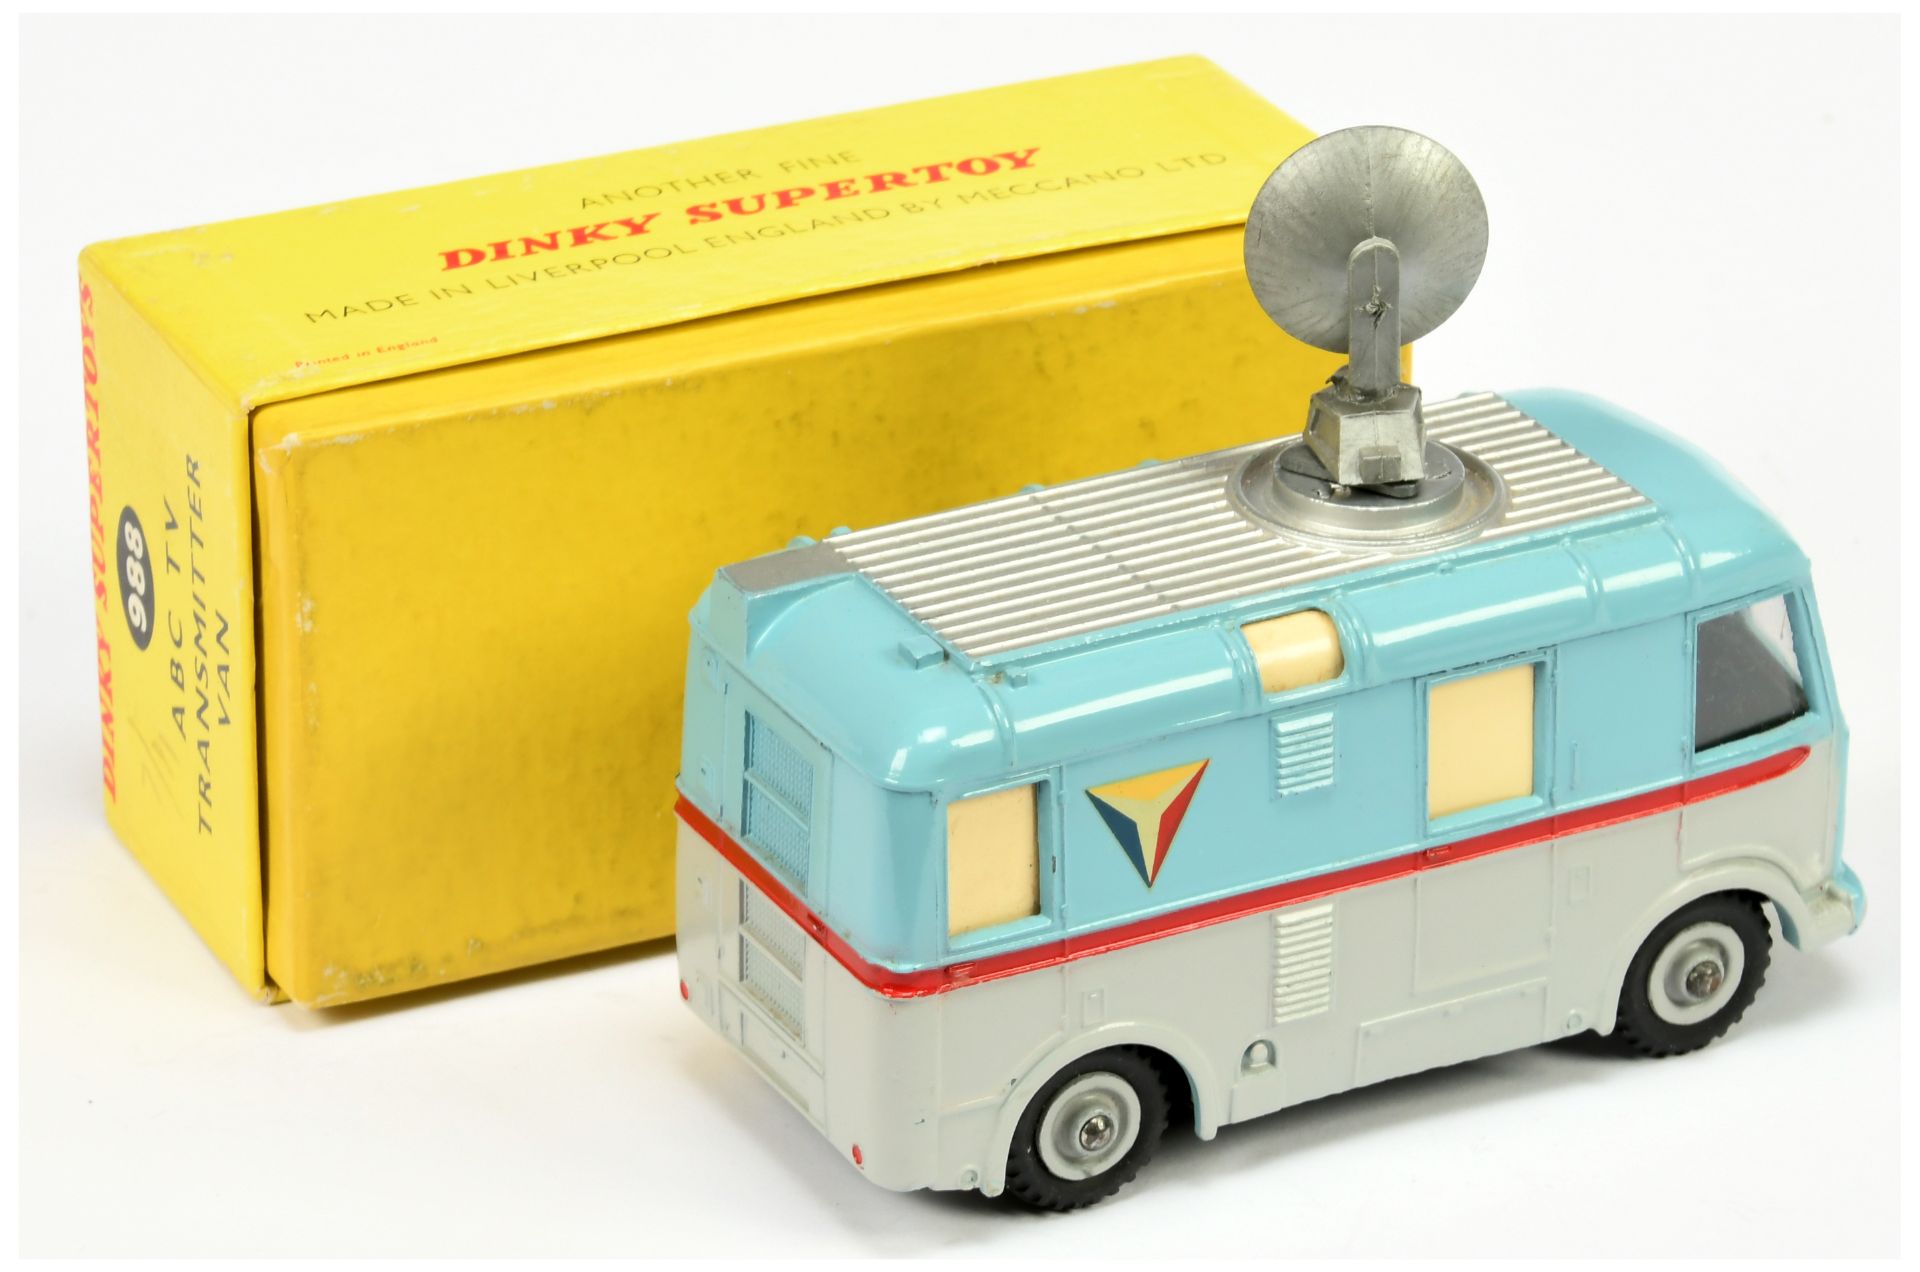 Dinky Toys 988 "ABC TV" Transmitter Van - Two-Tone Blue and grey, red side flashes, silver trim a... - Bild 2 aus 2